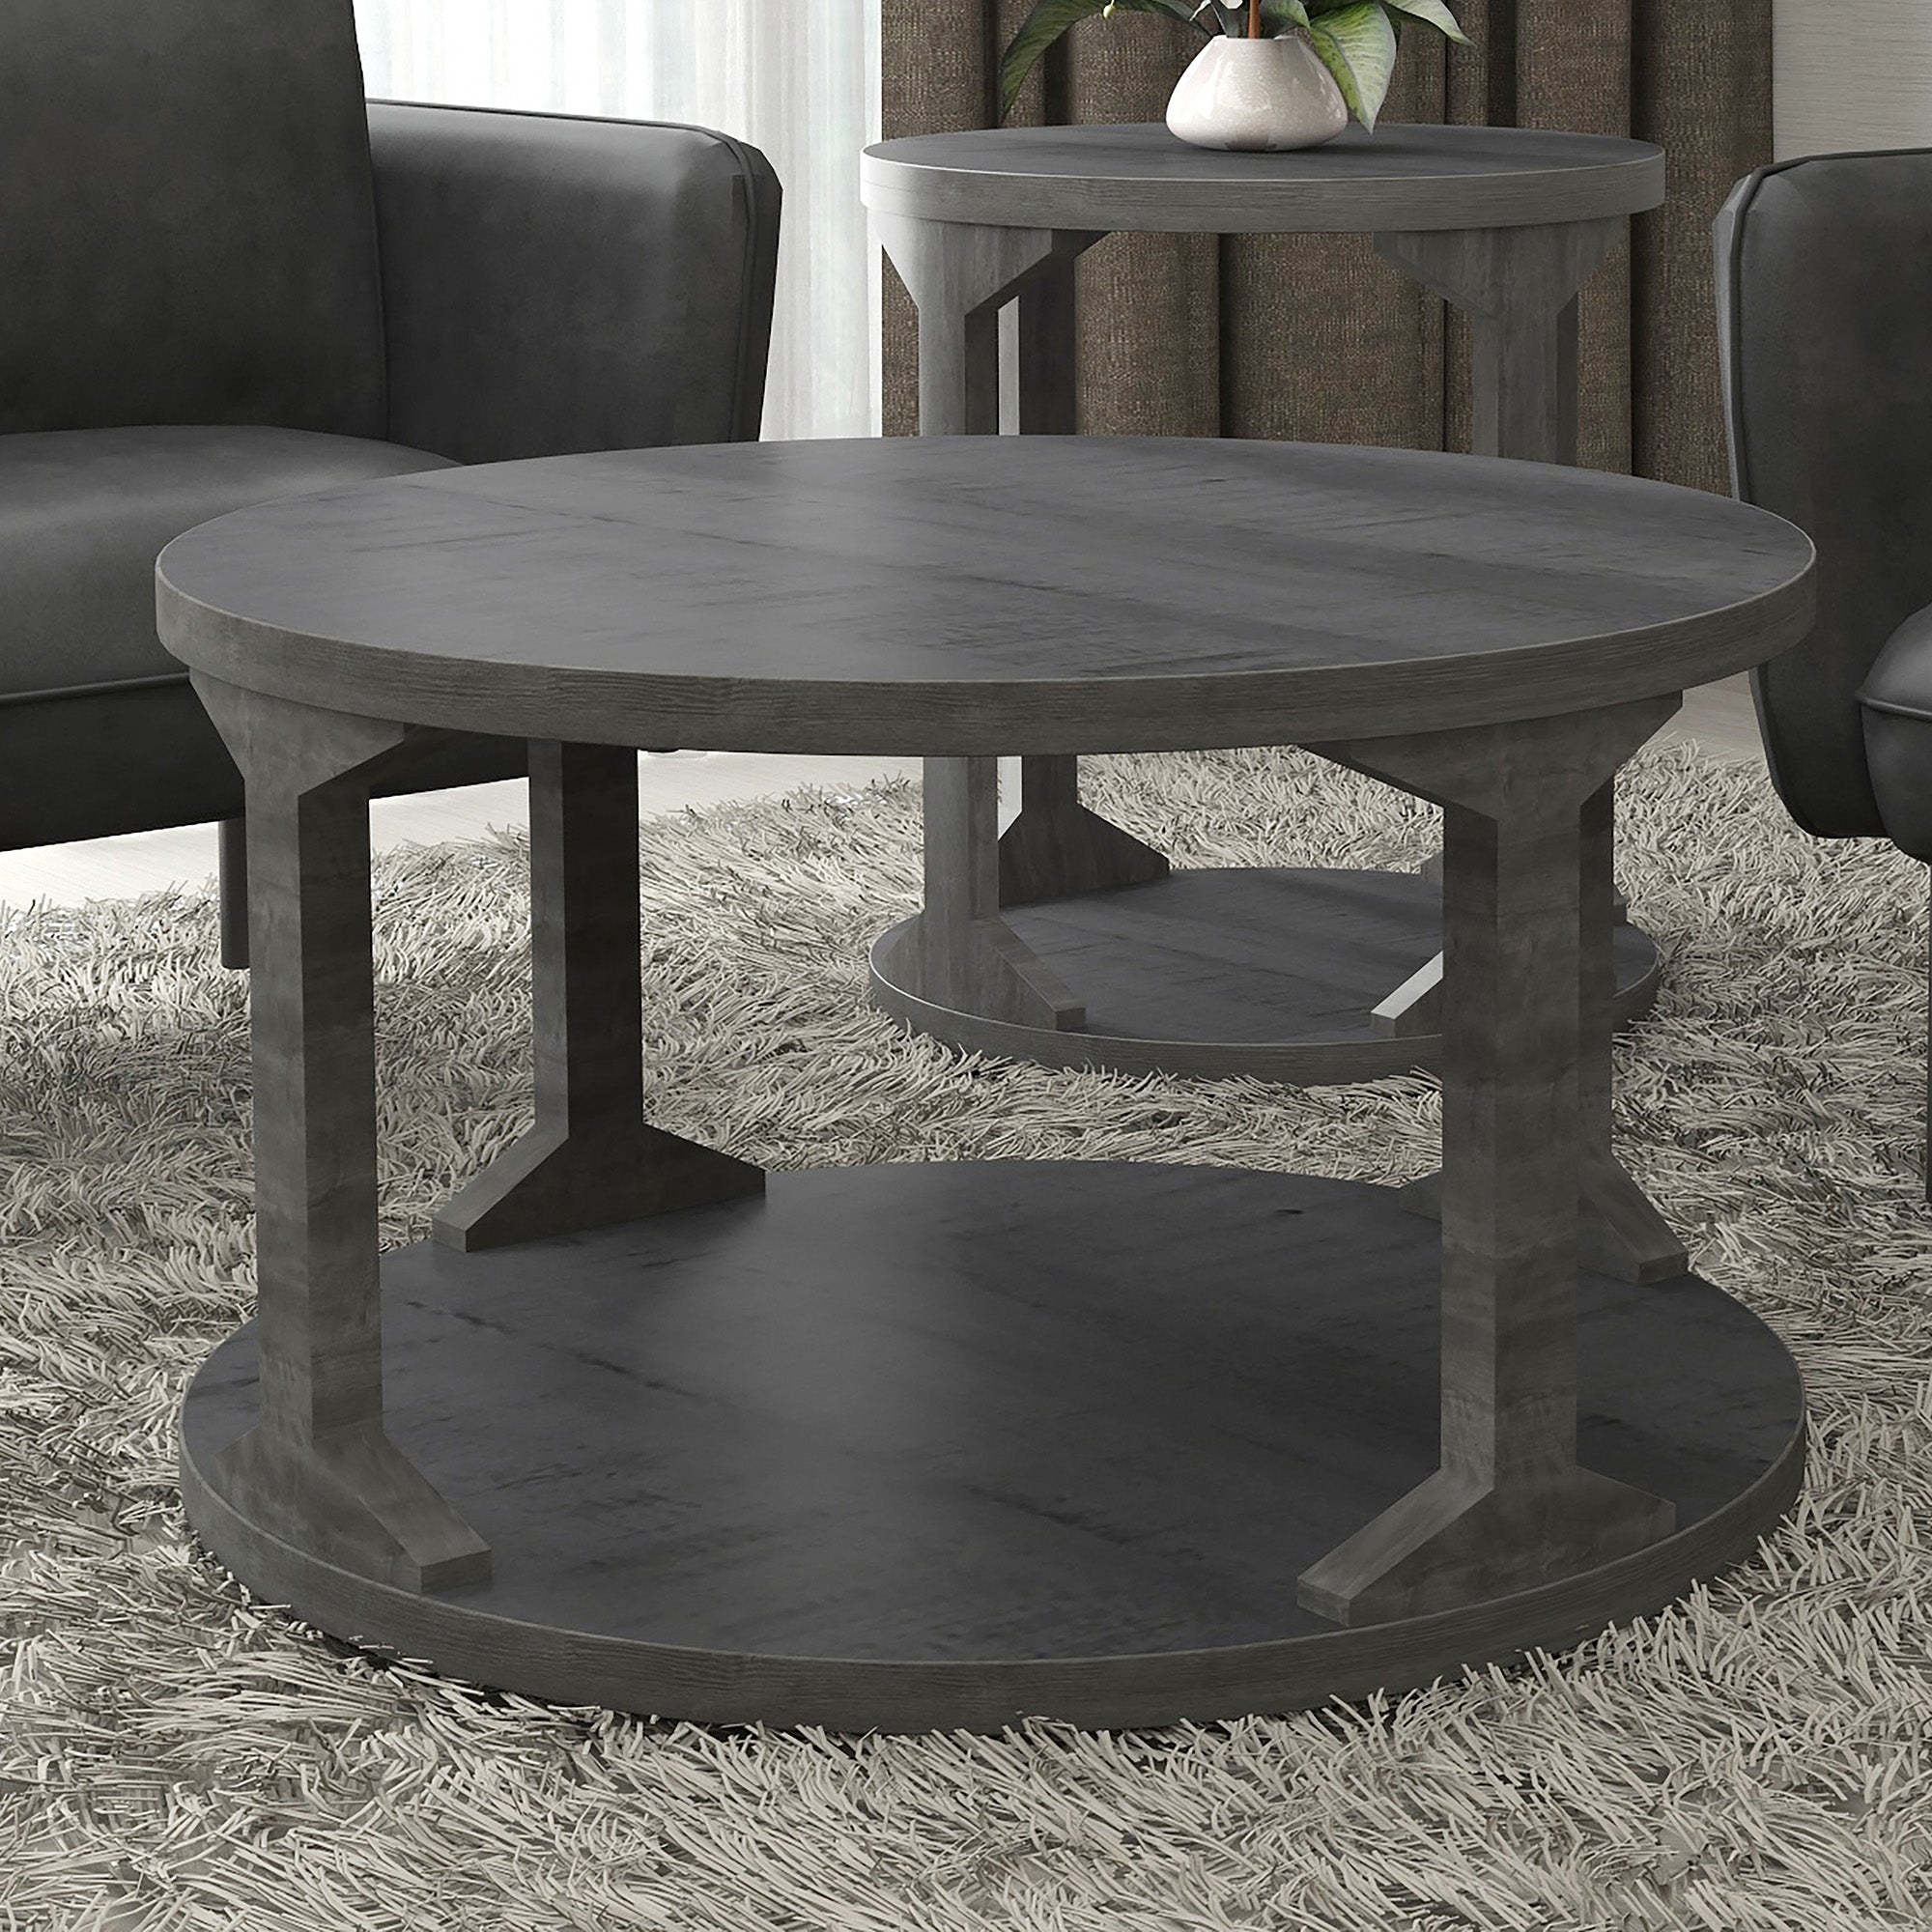 Avni Round Coffee Table in Distressed